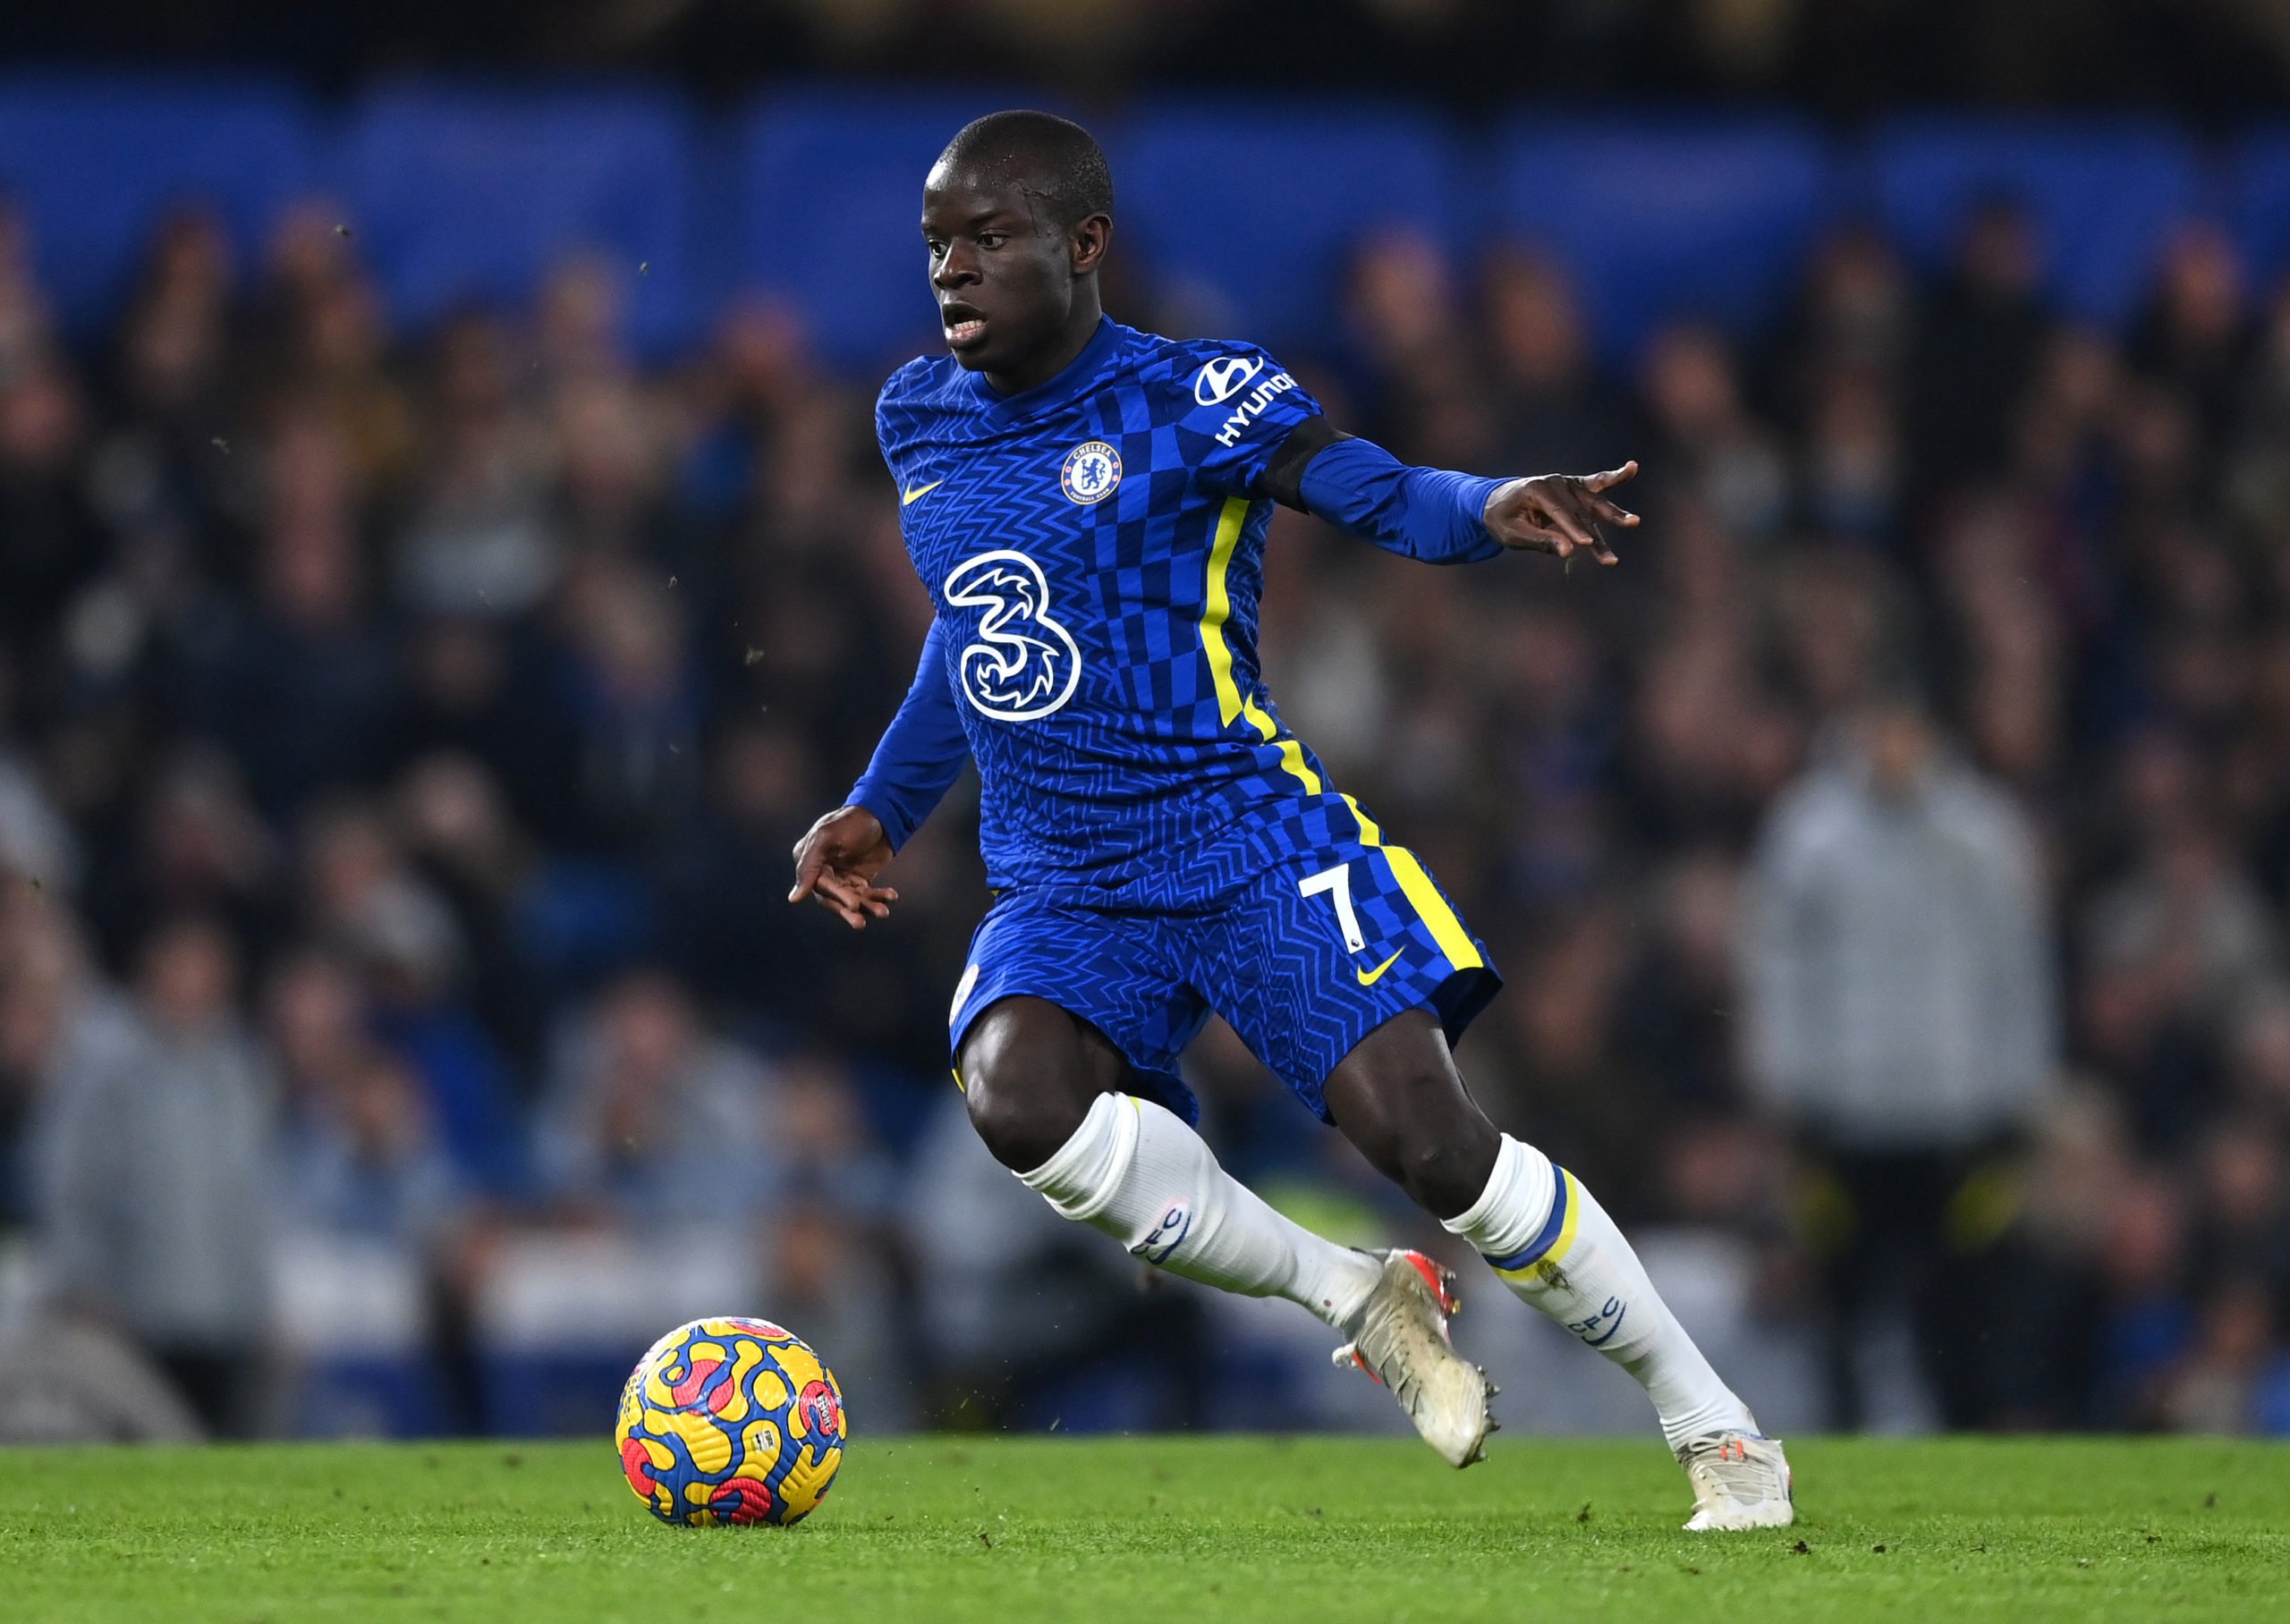 Report: Chelsea considering using 'phenomenal' midfielder as cover for N'Golo Kante in the future